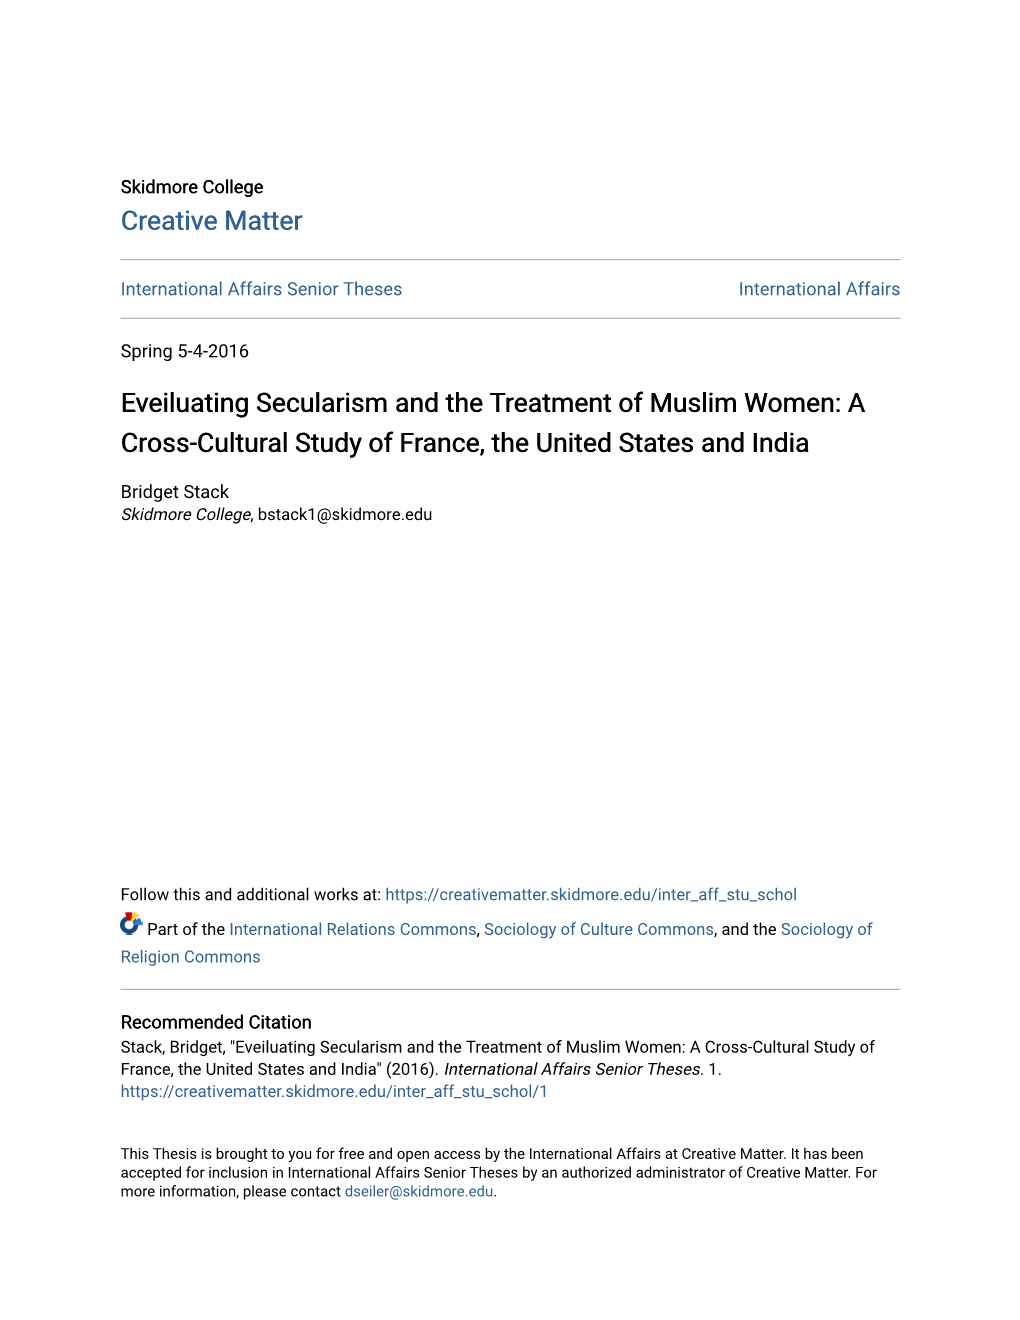 Eveiluating Secularism and the Treatment of Muslim Women: a Cross-Cultural Study of France, the United States and India